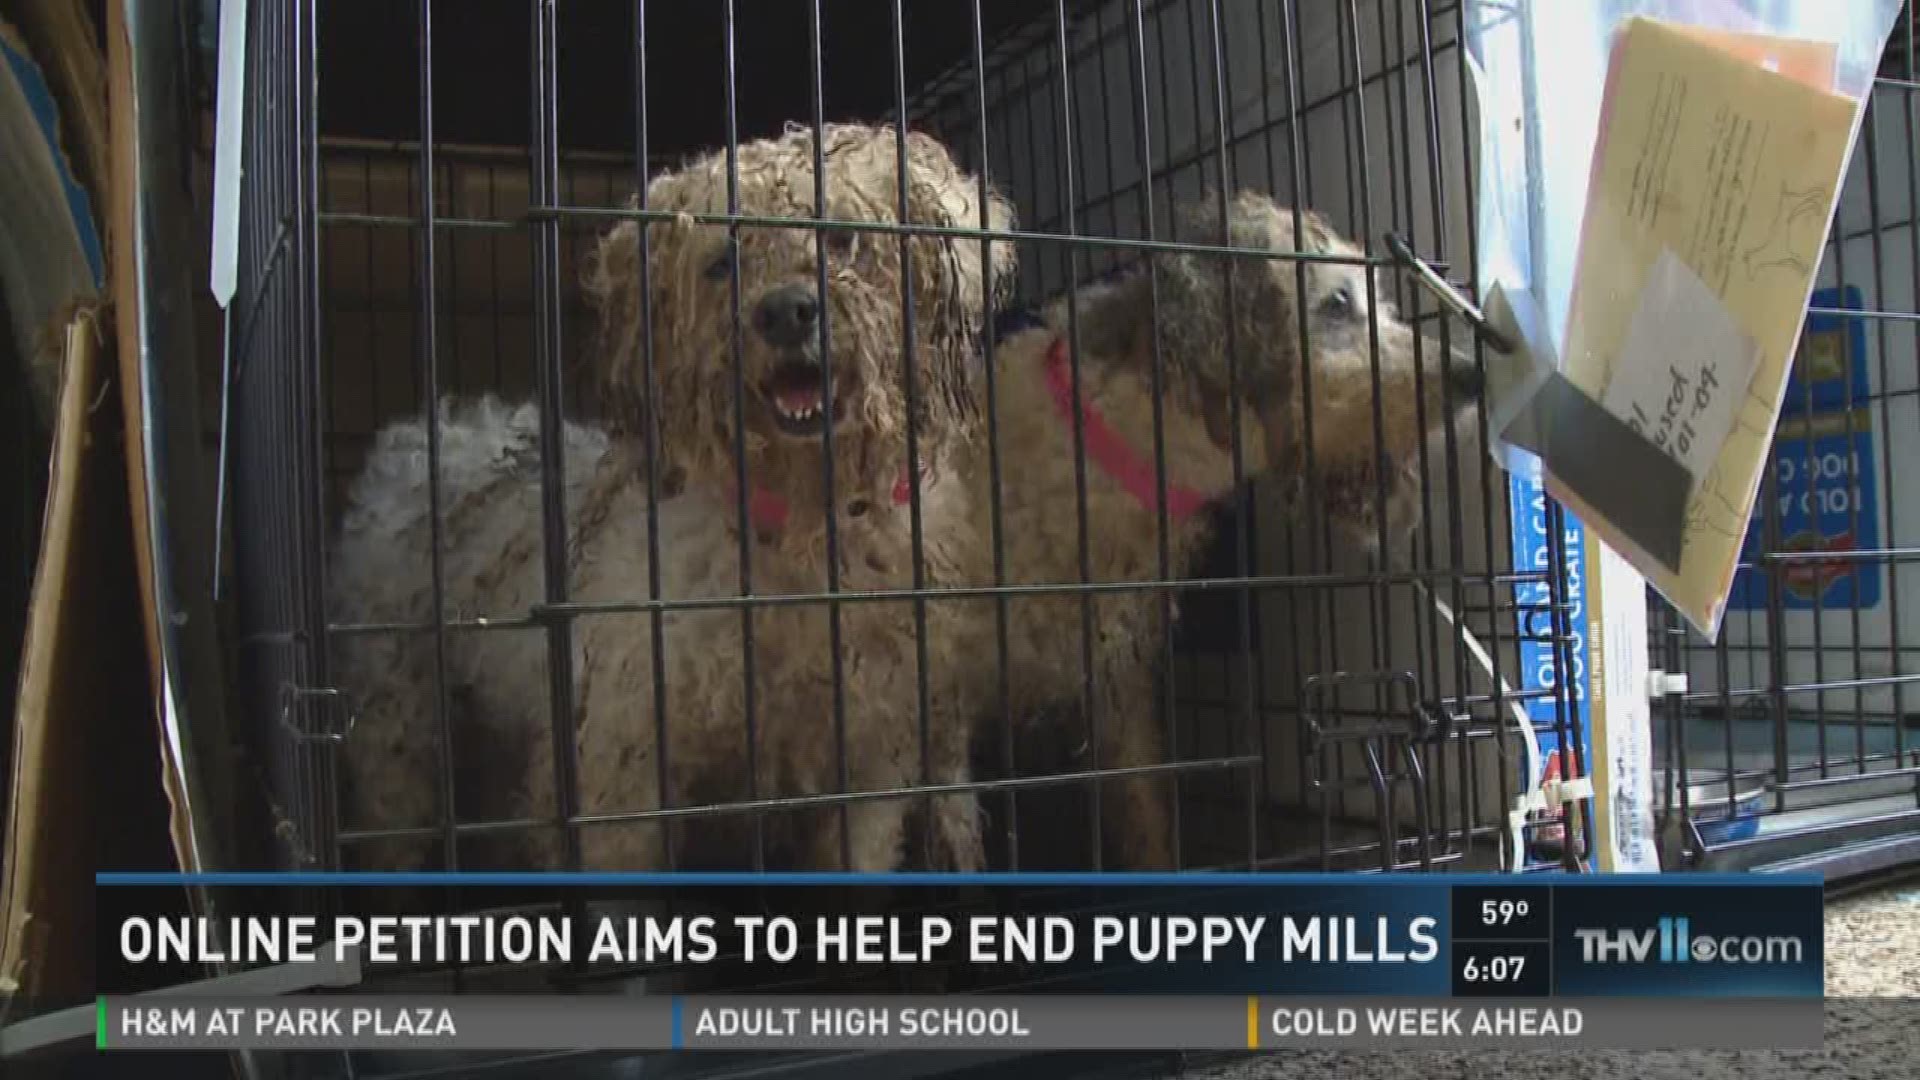 Online petition aims to help end puppy mills